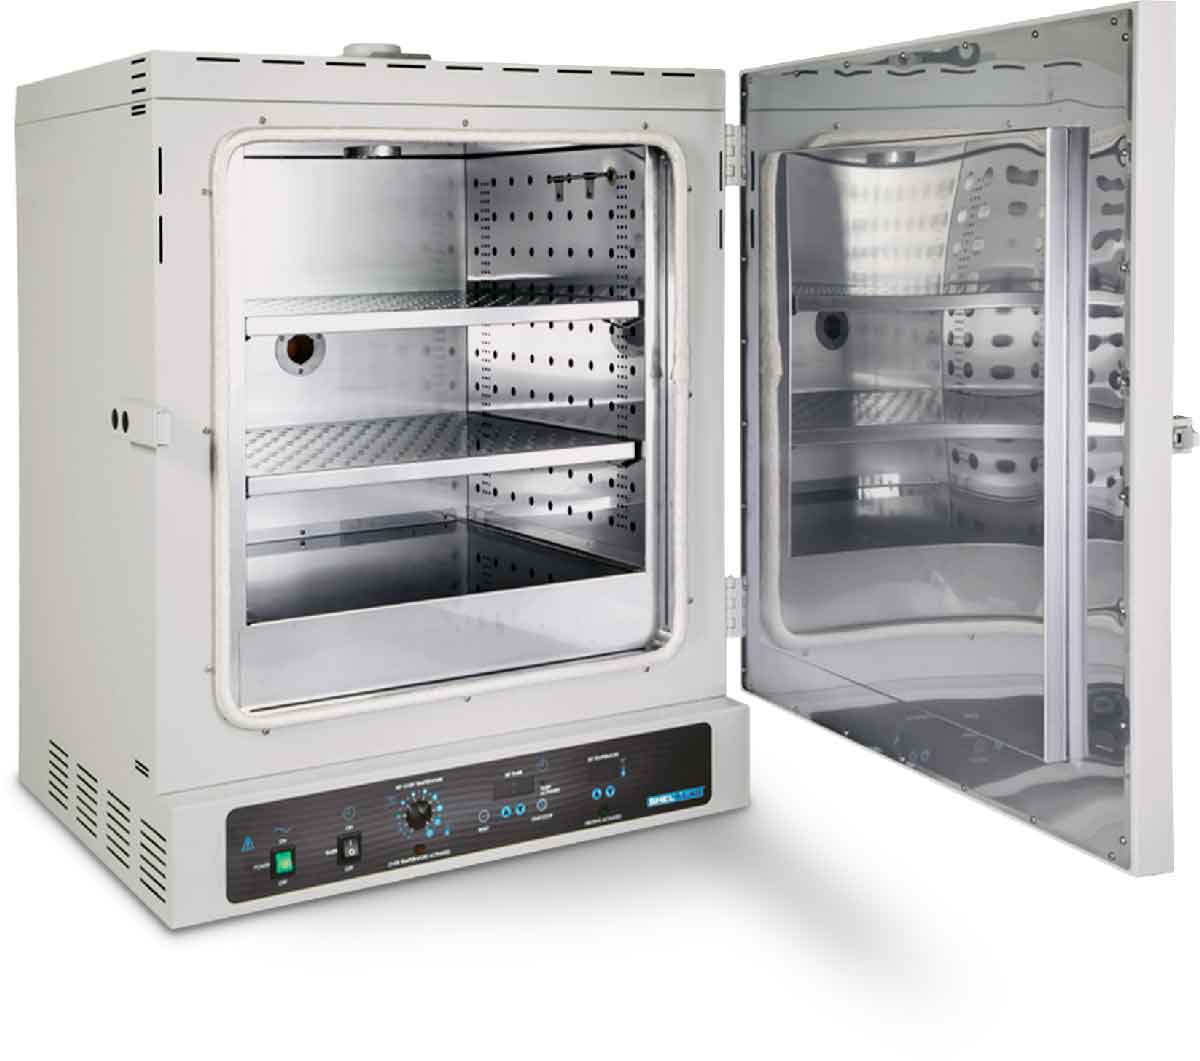 What Are Commercial Uses of Forced Air Ovens?